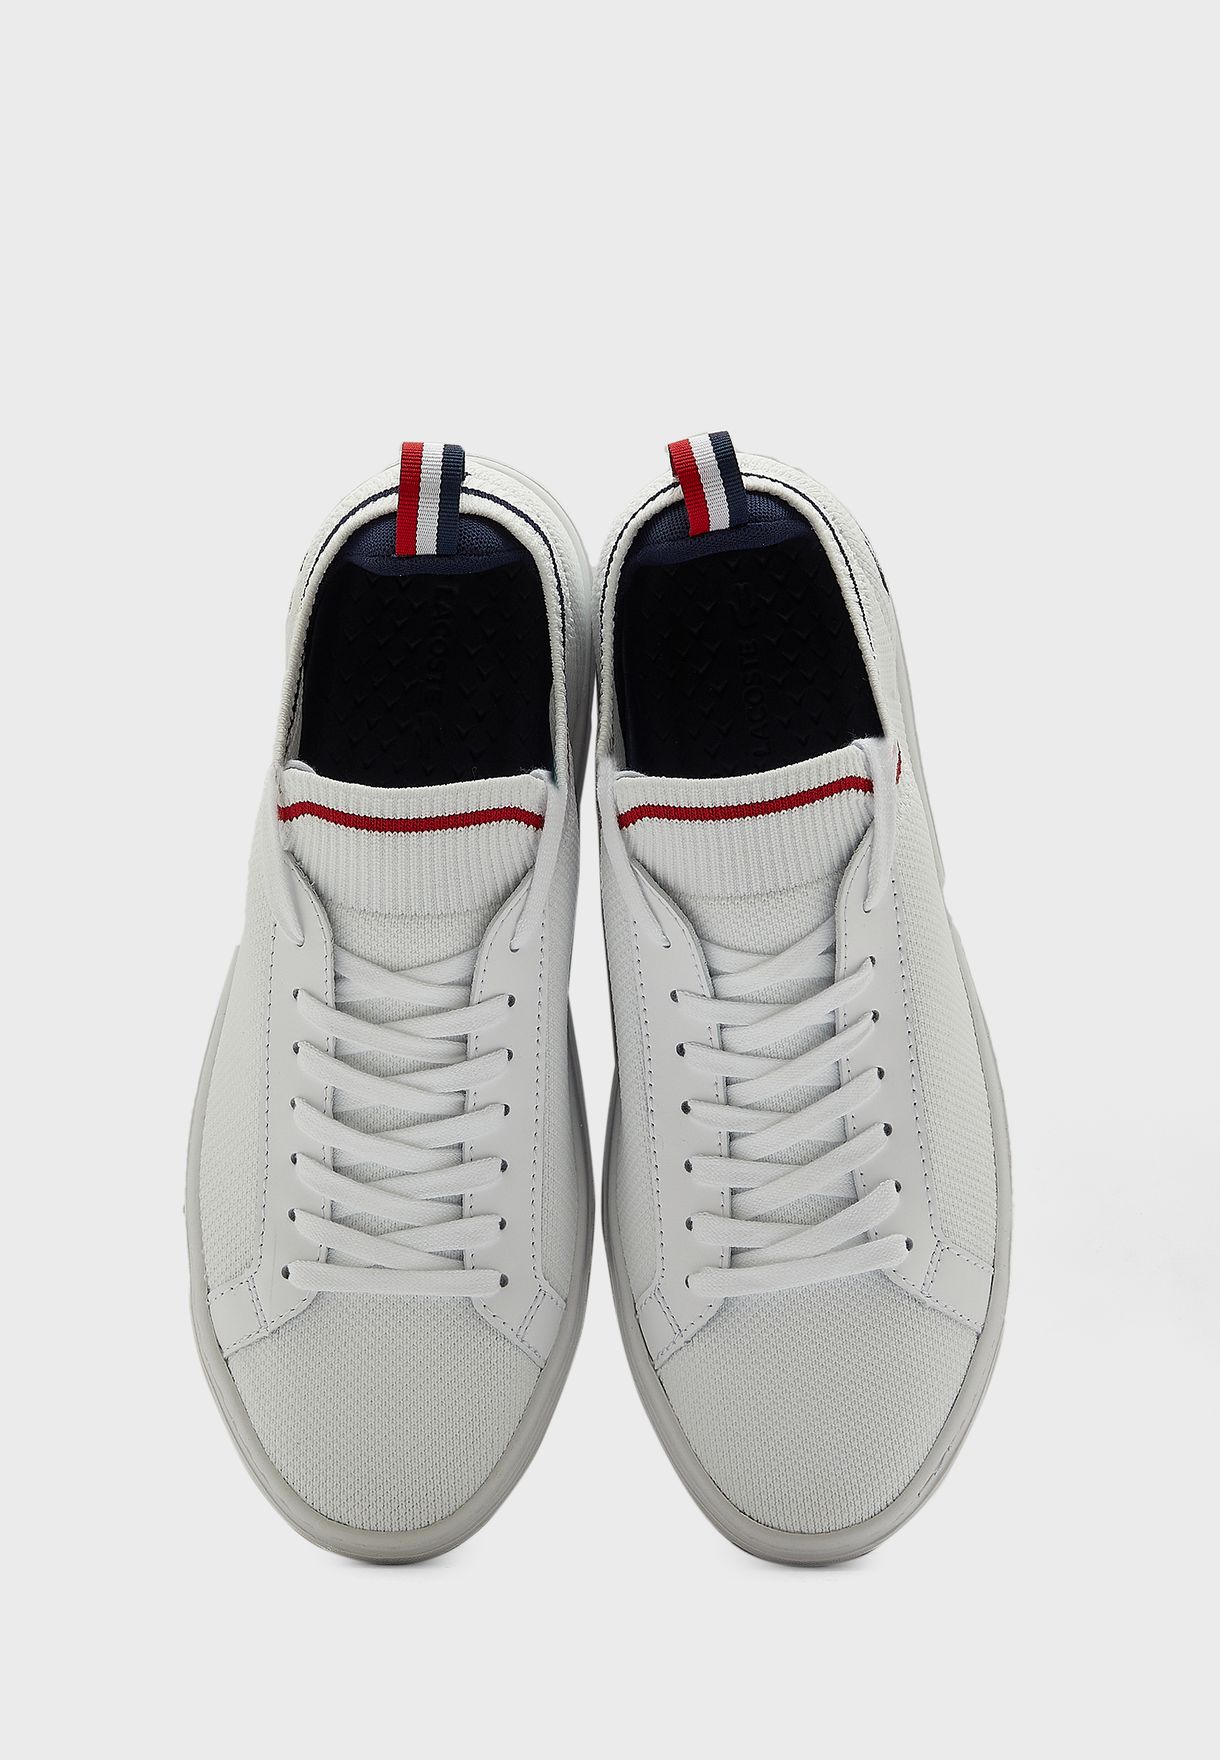 La Piquee Lace Up Sneakers